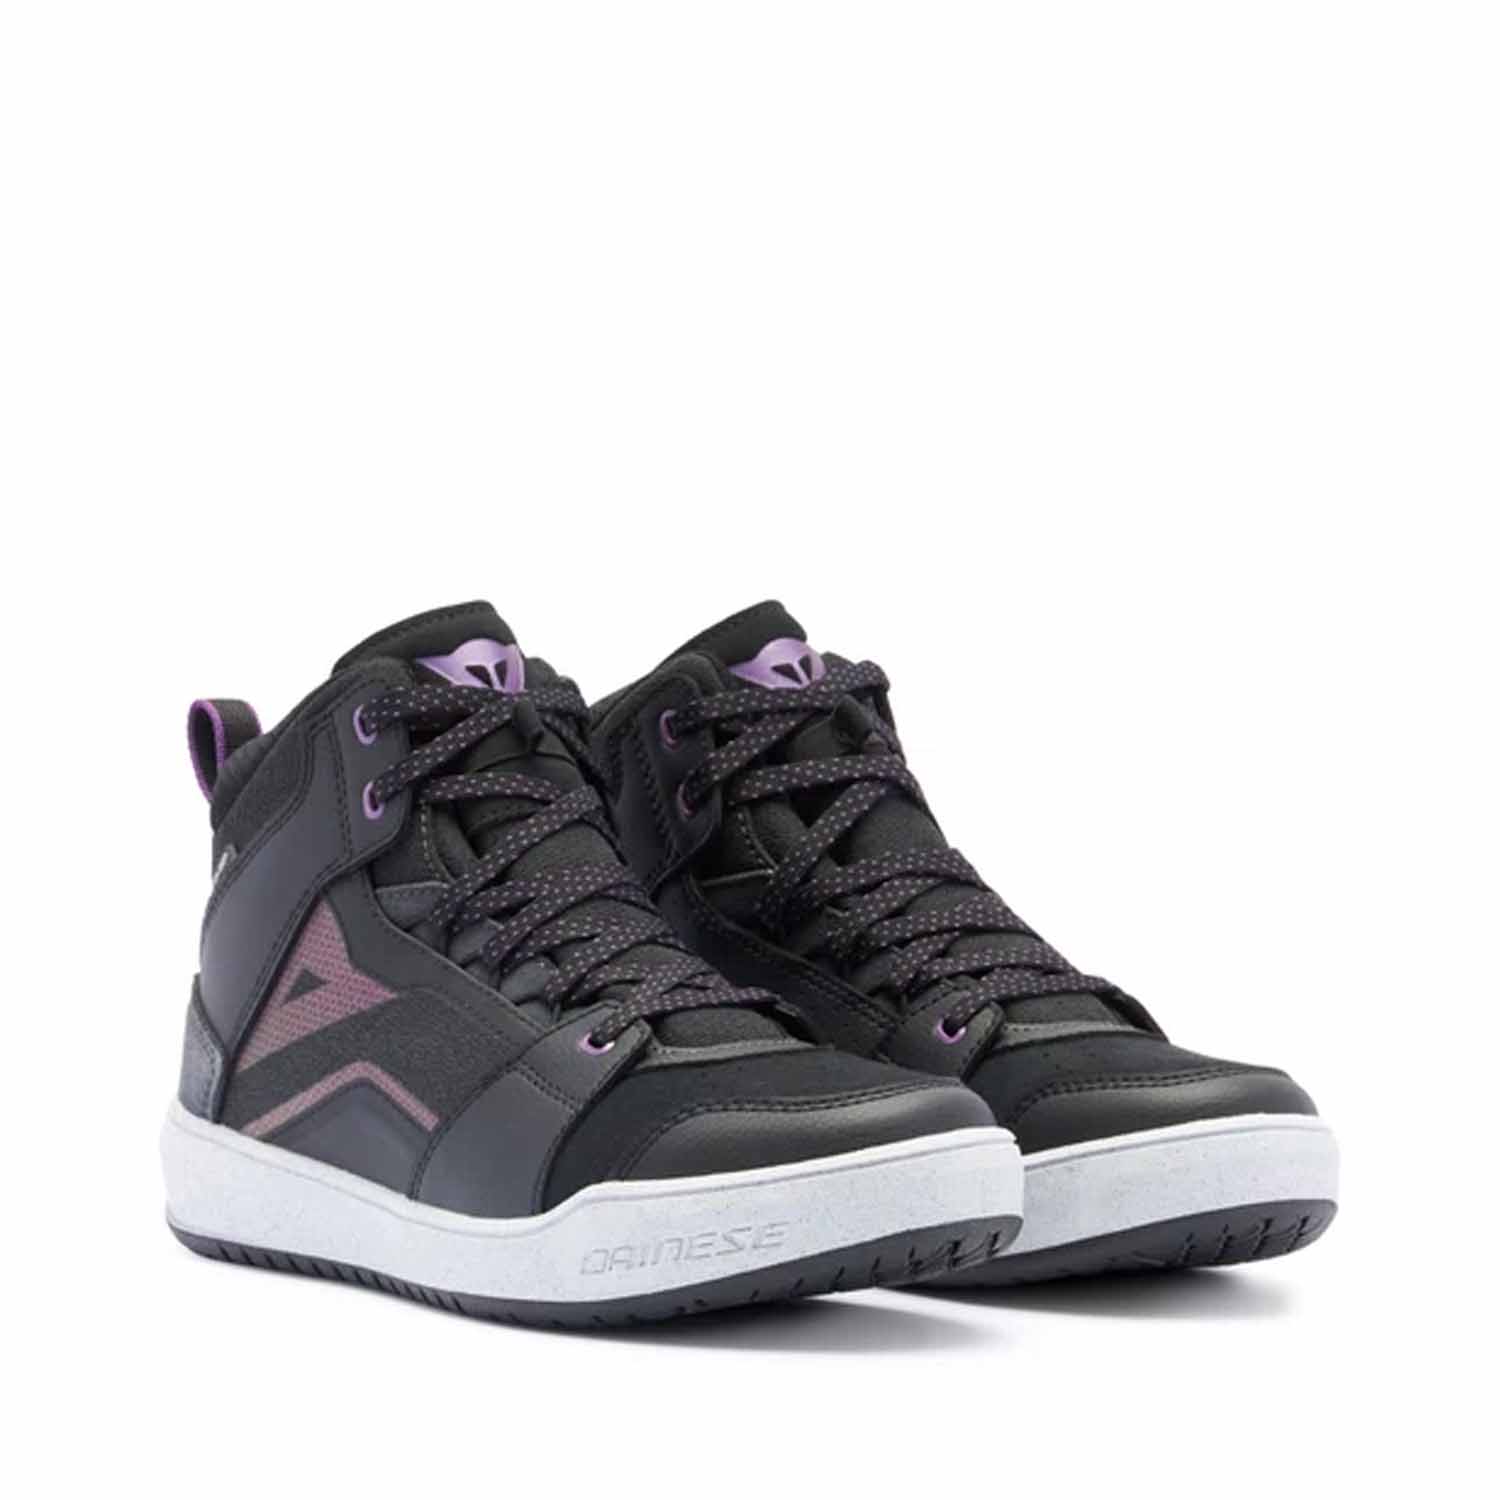 Image of EU Dainese Suburb D-WP Shoes WMN Black White Metal Purple Taille 36